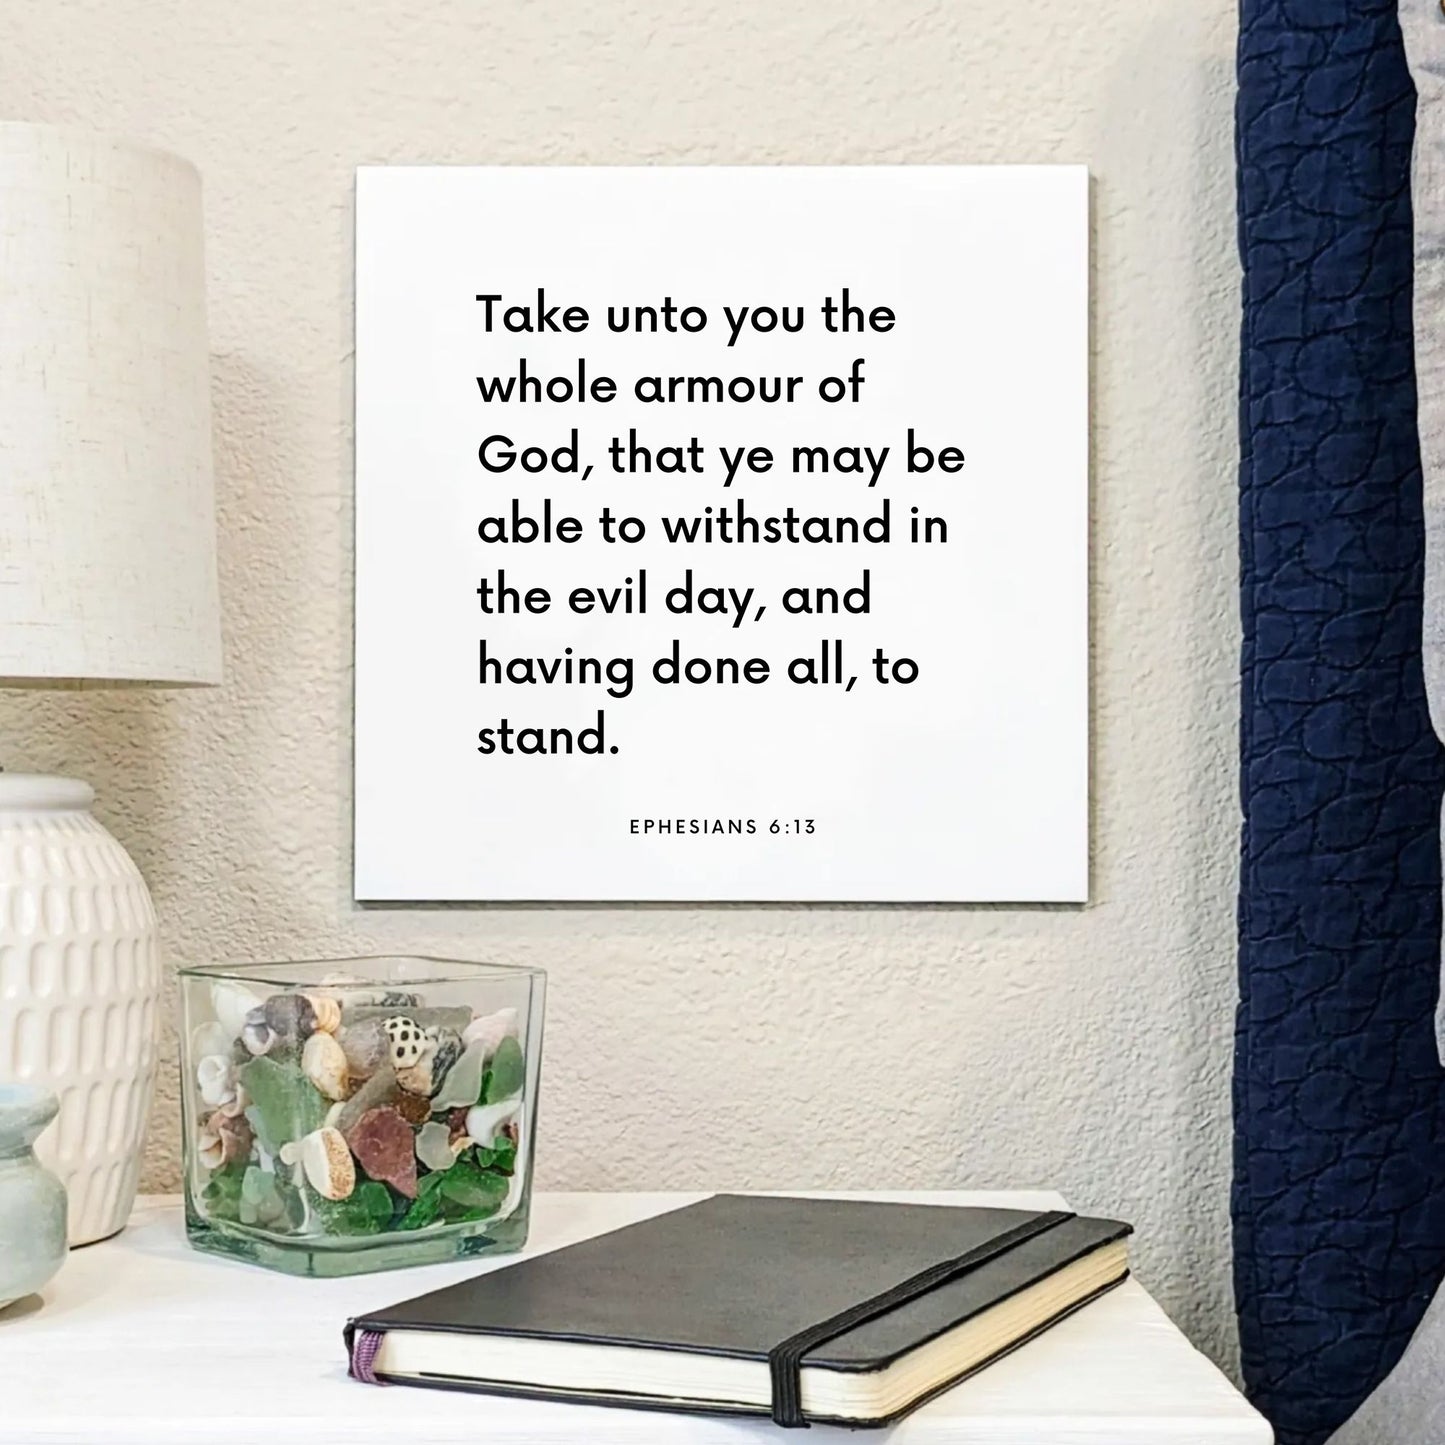 Bedside mouting of the scripture tile for Ephesians 6:13 - "Take unto you the whole armour of God"